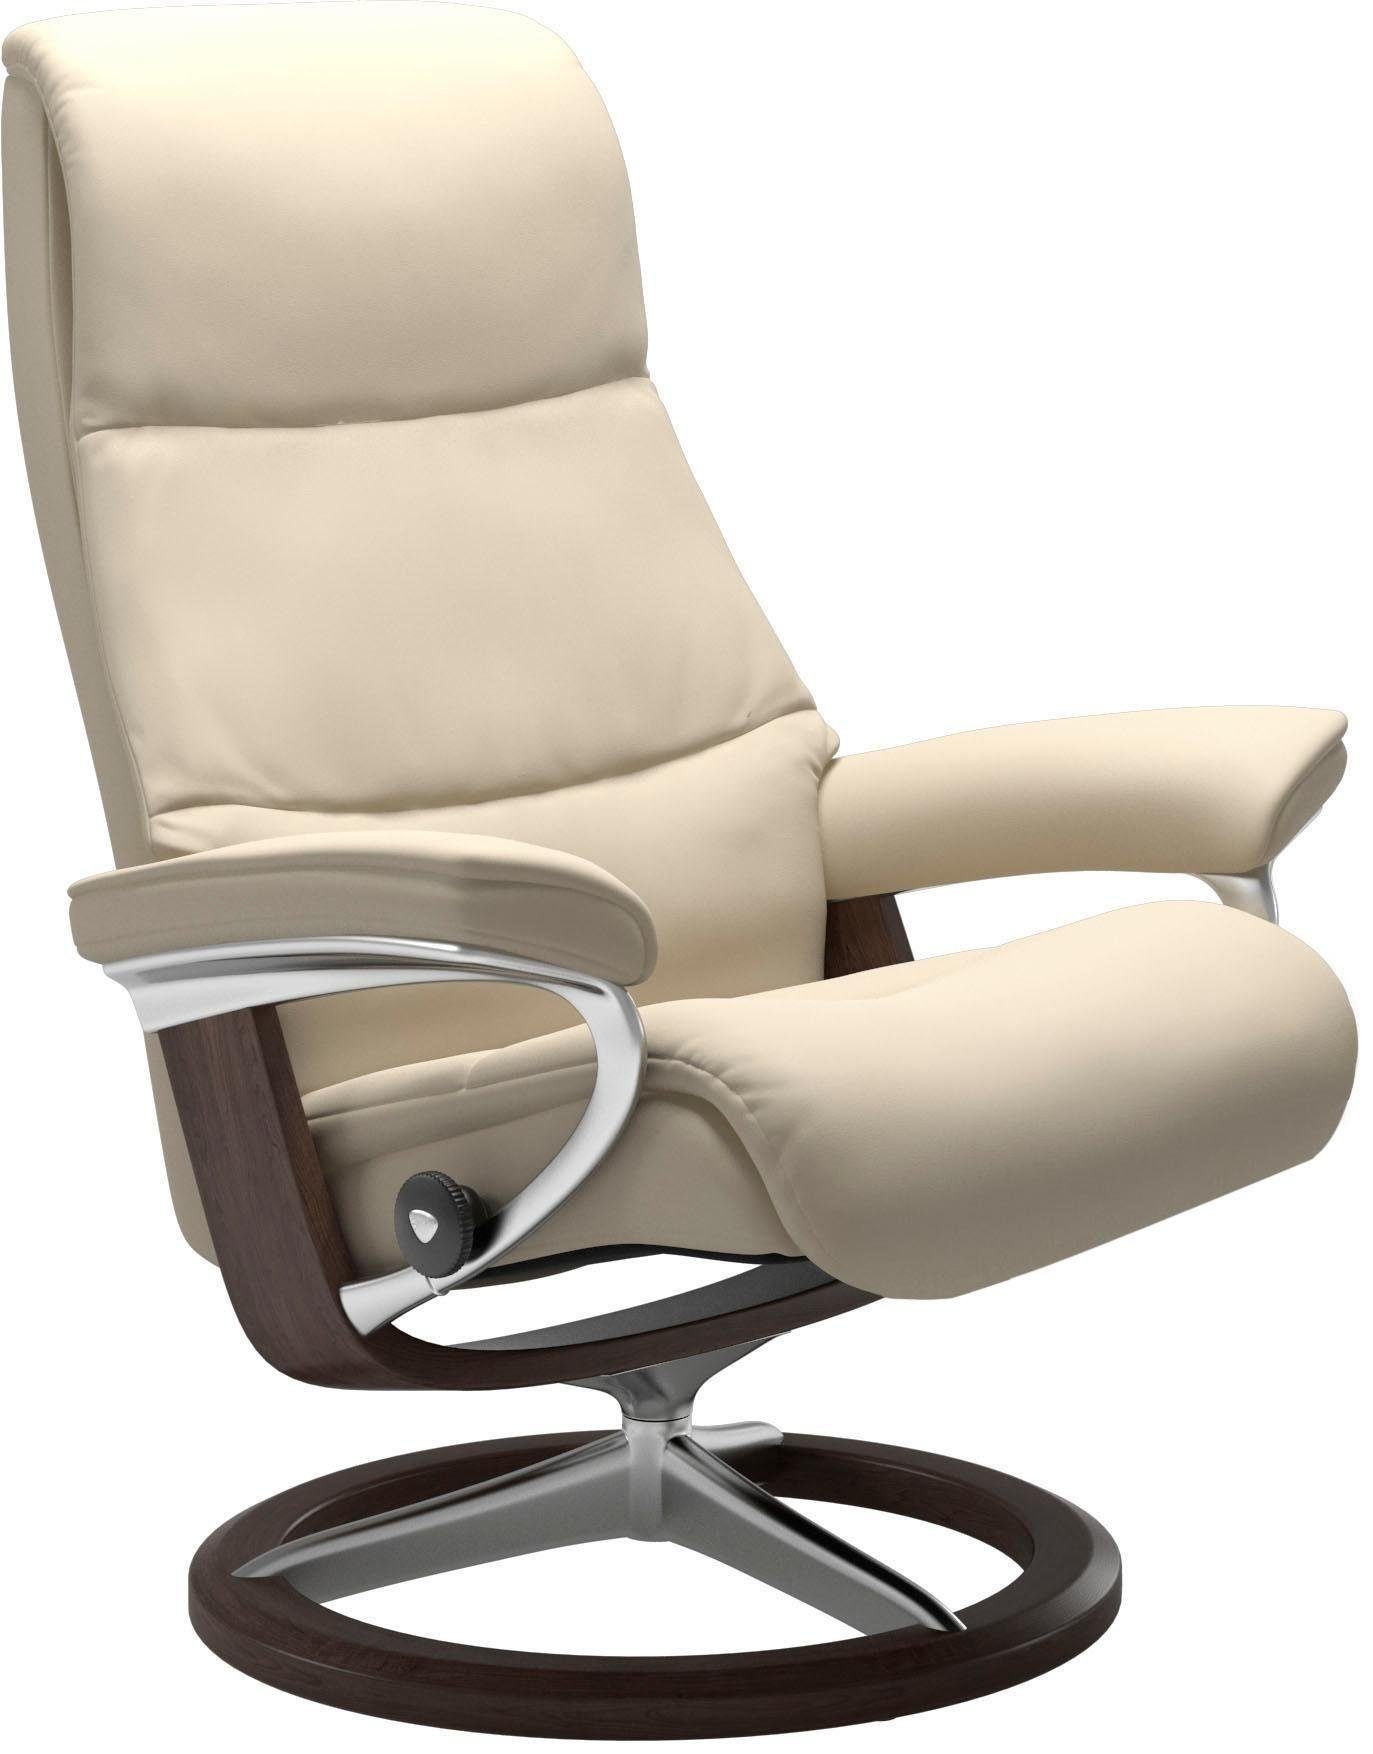 Base, L,Gestell Relaxsessel mit Signature Größe Wenge Stressless® View,